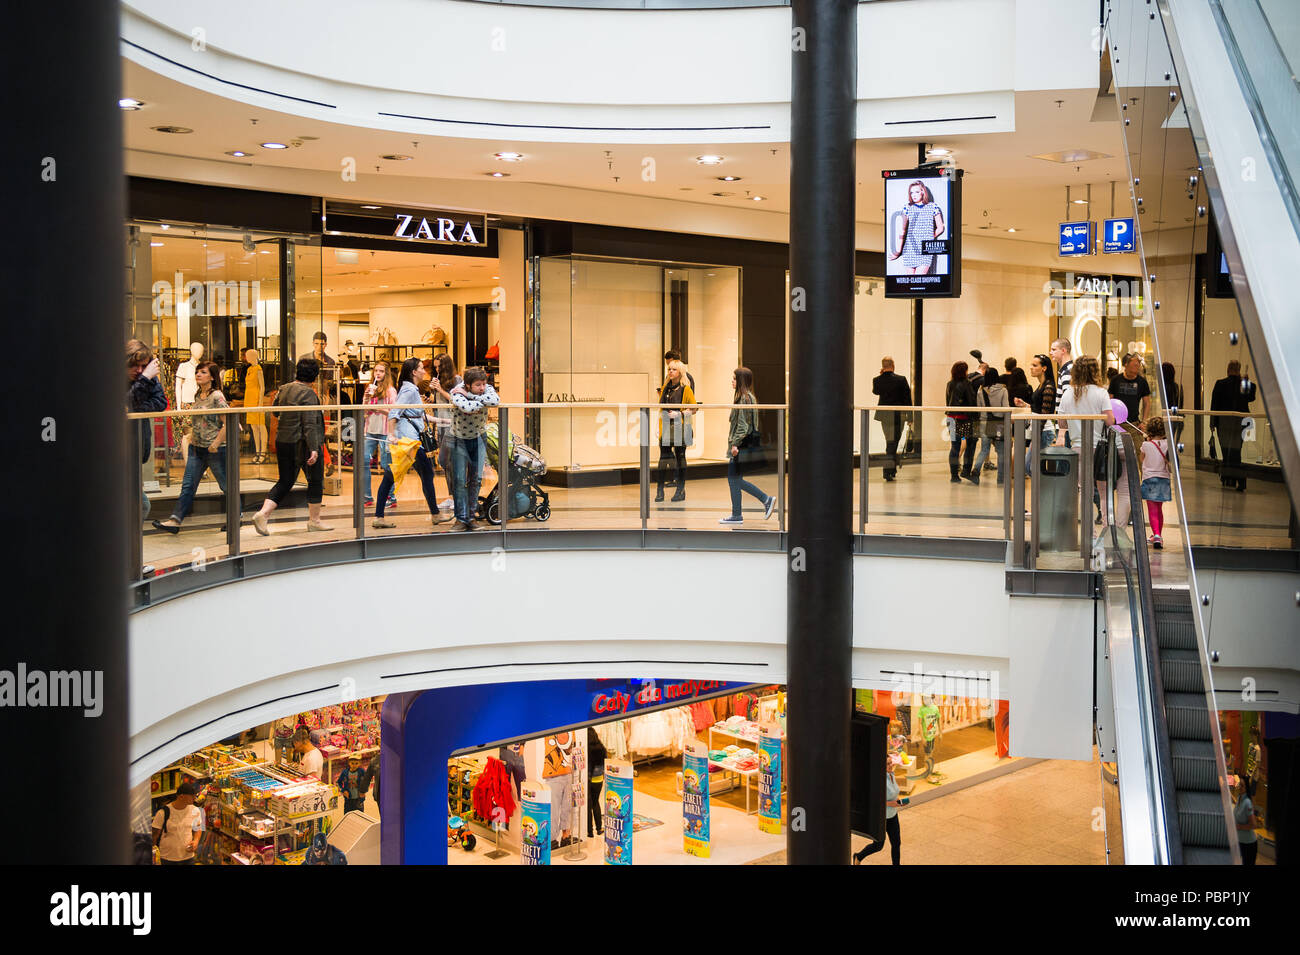 KRAKOW, POLAND - MAY 30, 2015: Zara section of Galeria Krakowska city mall  Krakow, Poland. Galeria Krakowska has 270 specialty shops, cafes, and resta  Stock Photo - Alamy